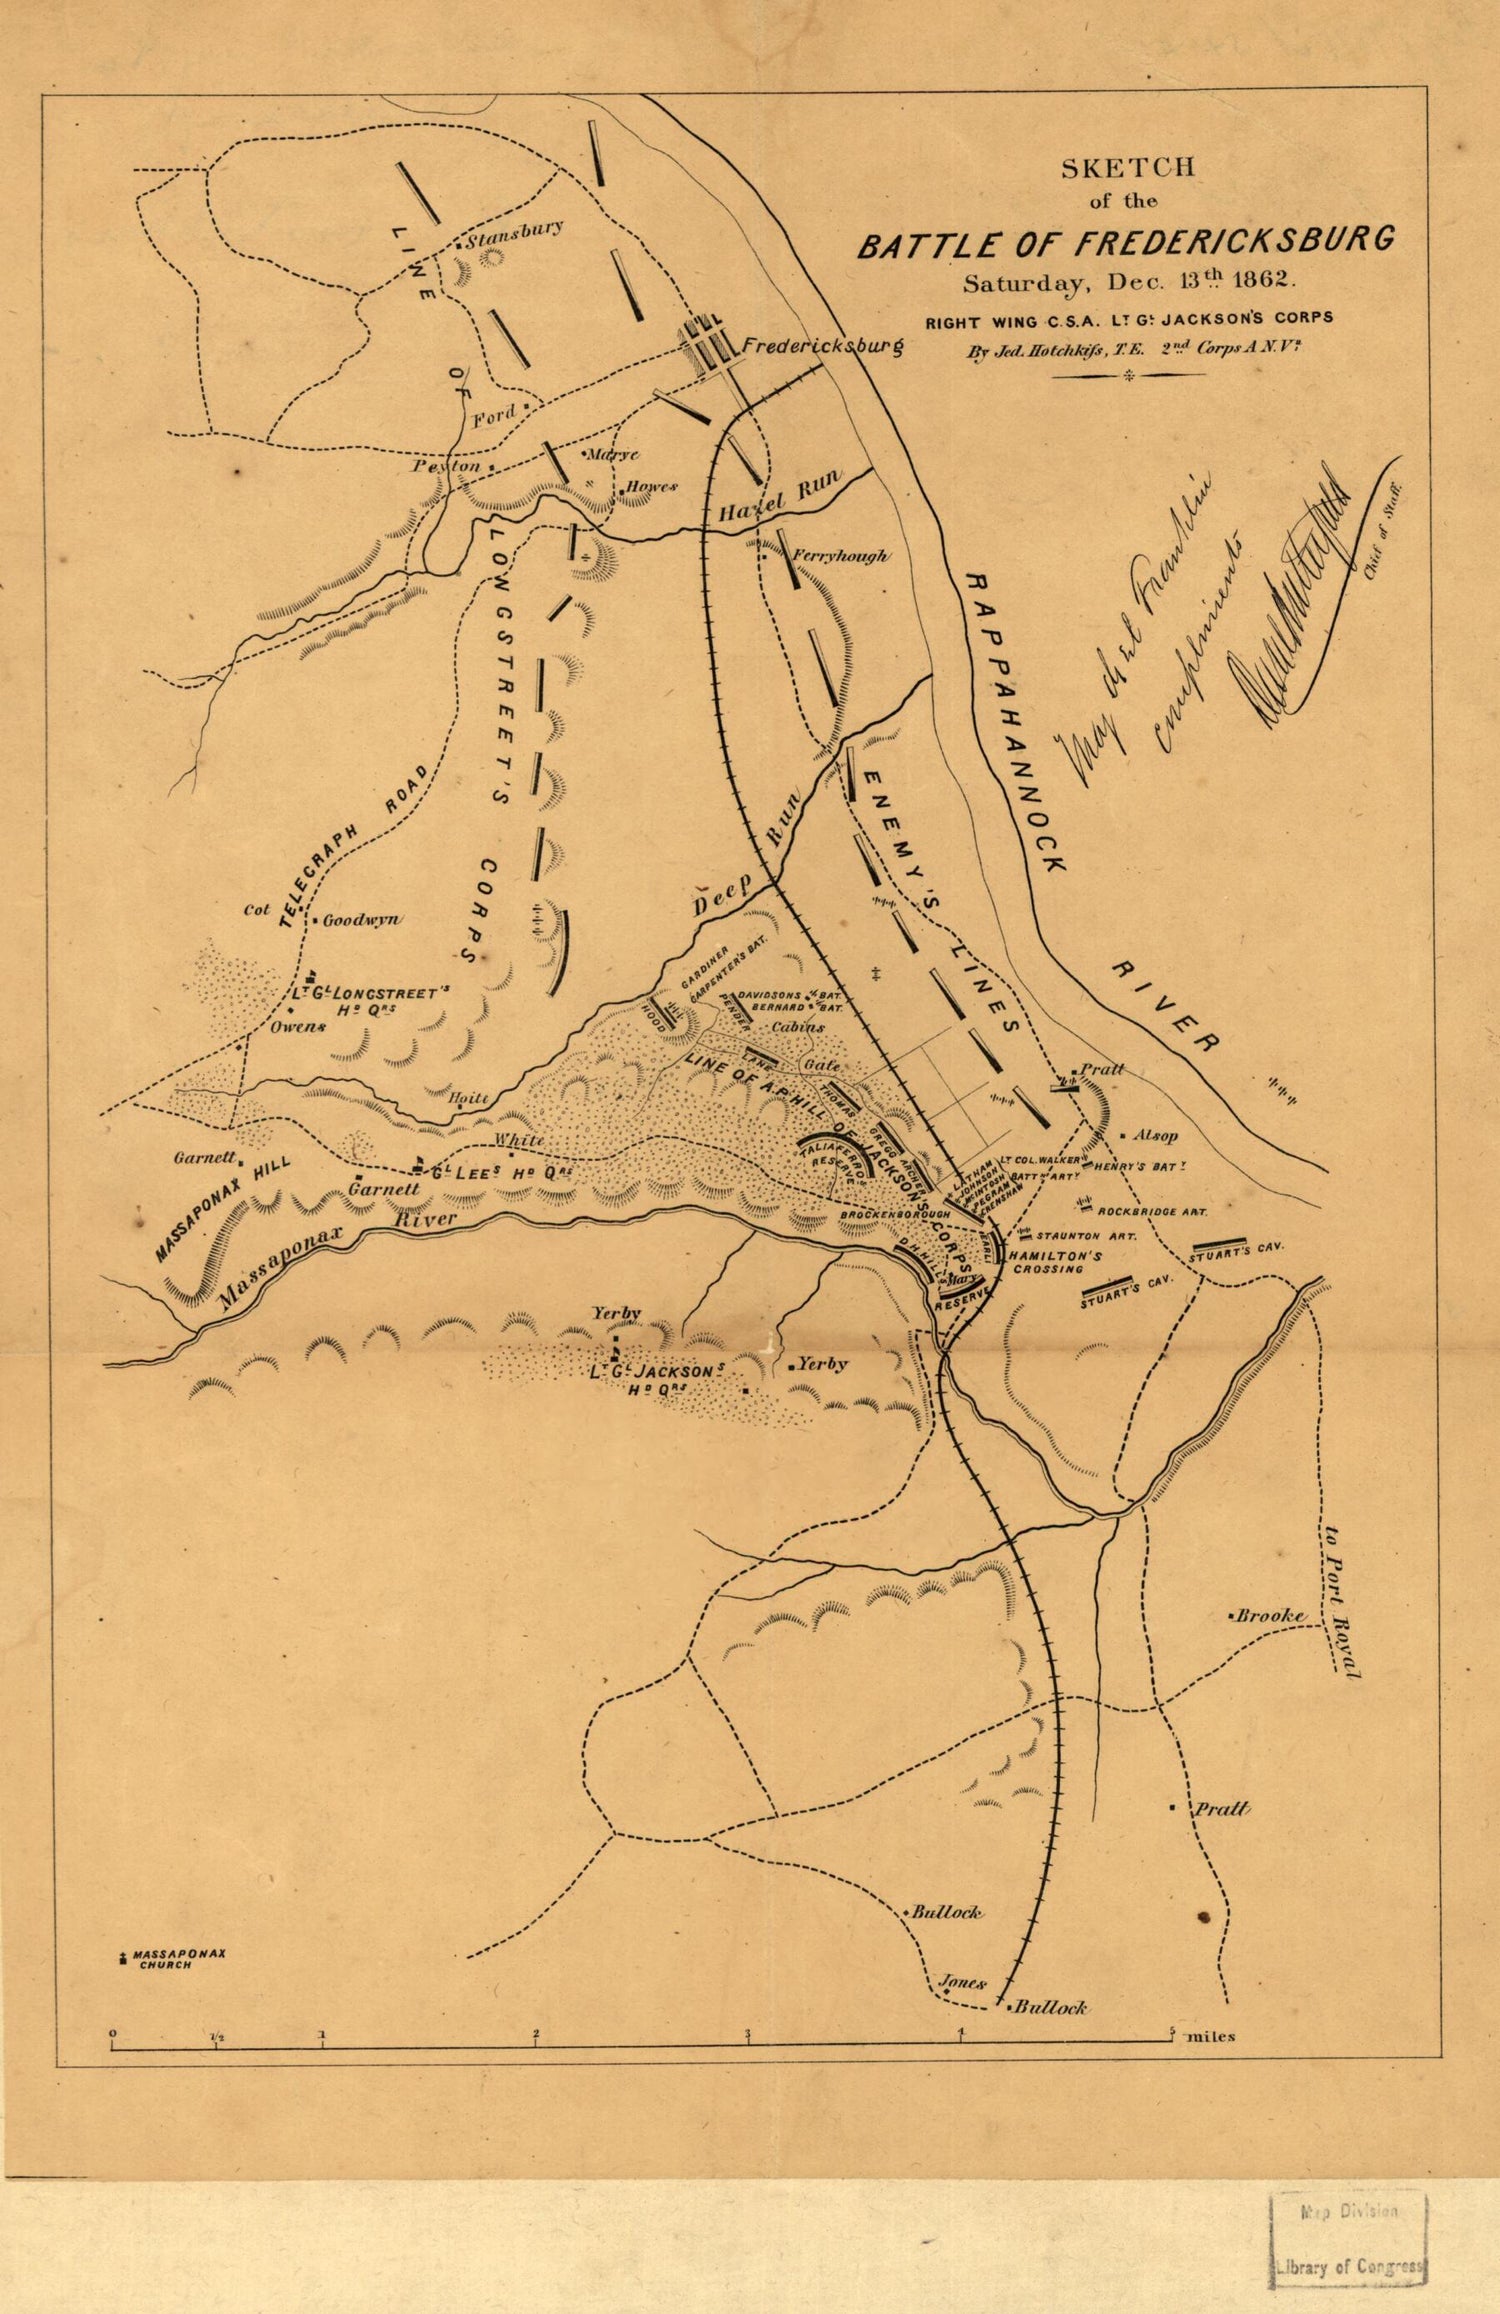 This old map of Sketch of the Battle of Fredericksburg, Saturday, Dec. 13th from 1862, Right Wing, C.S.A., Lt. Gl. Jackson&